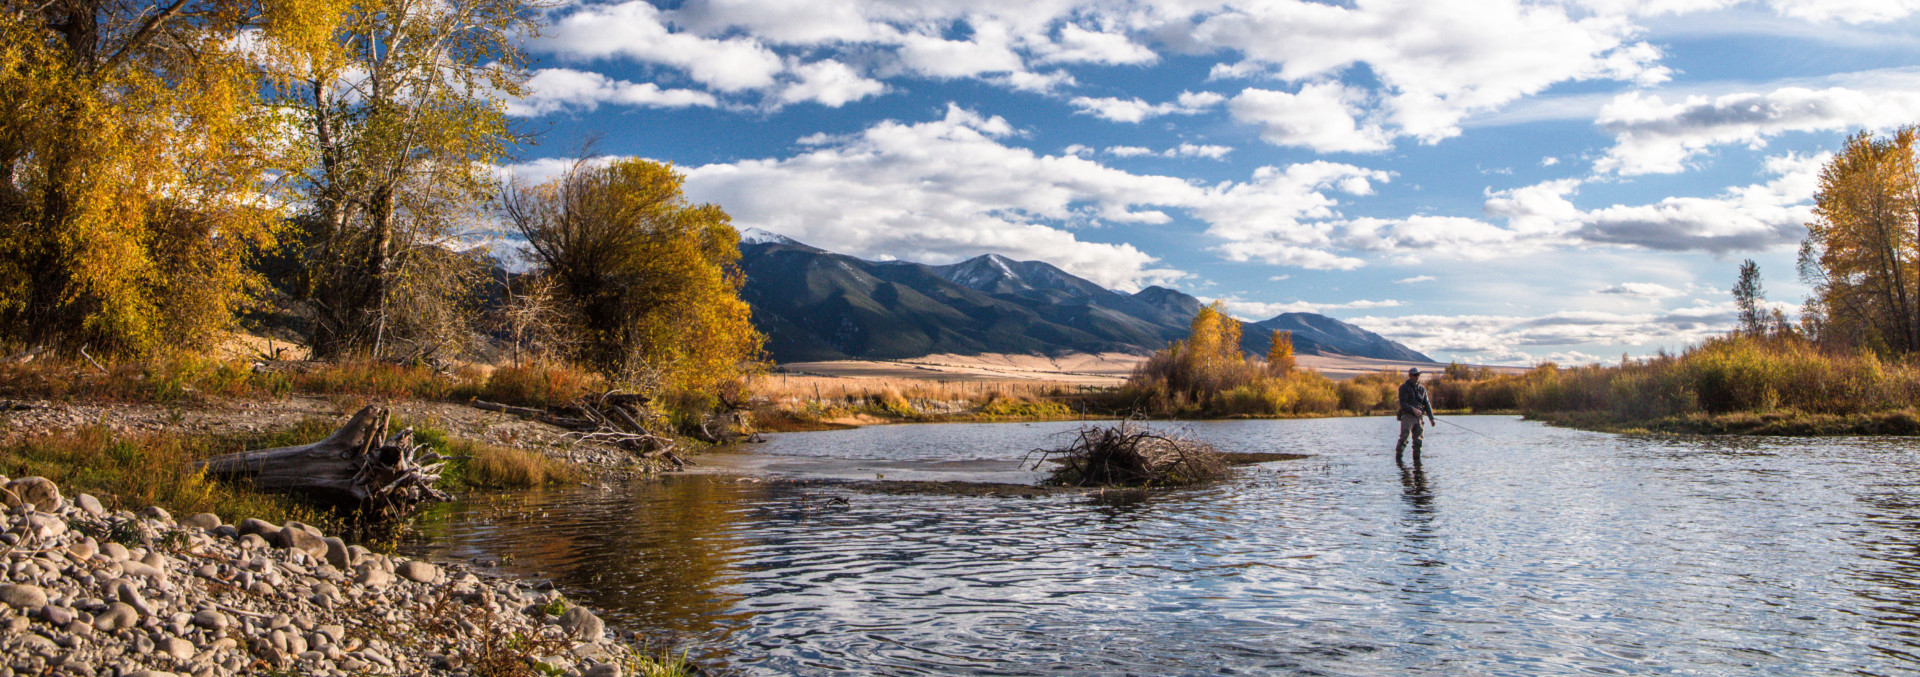 montana fly fishing property for sale jefferson springs ranch